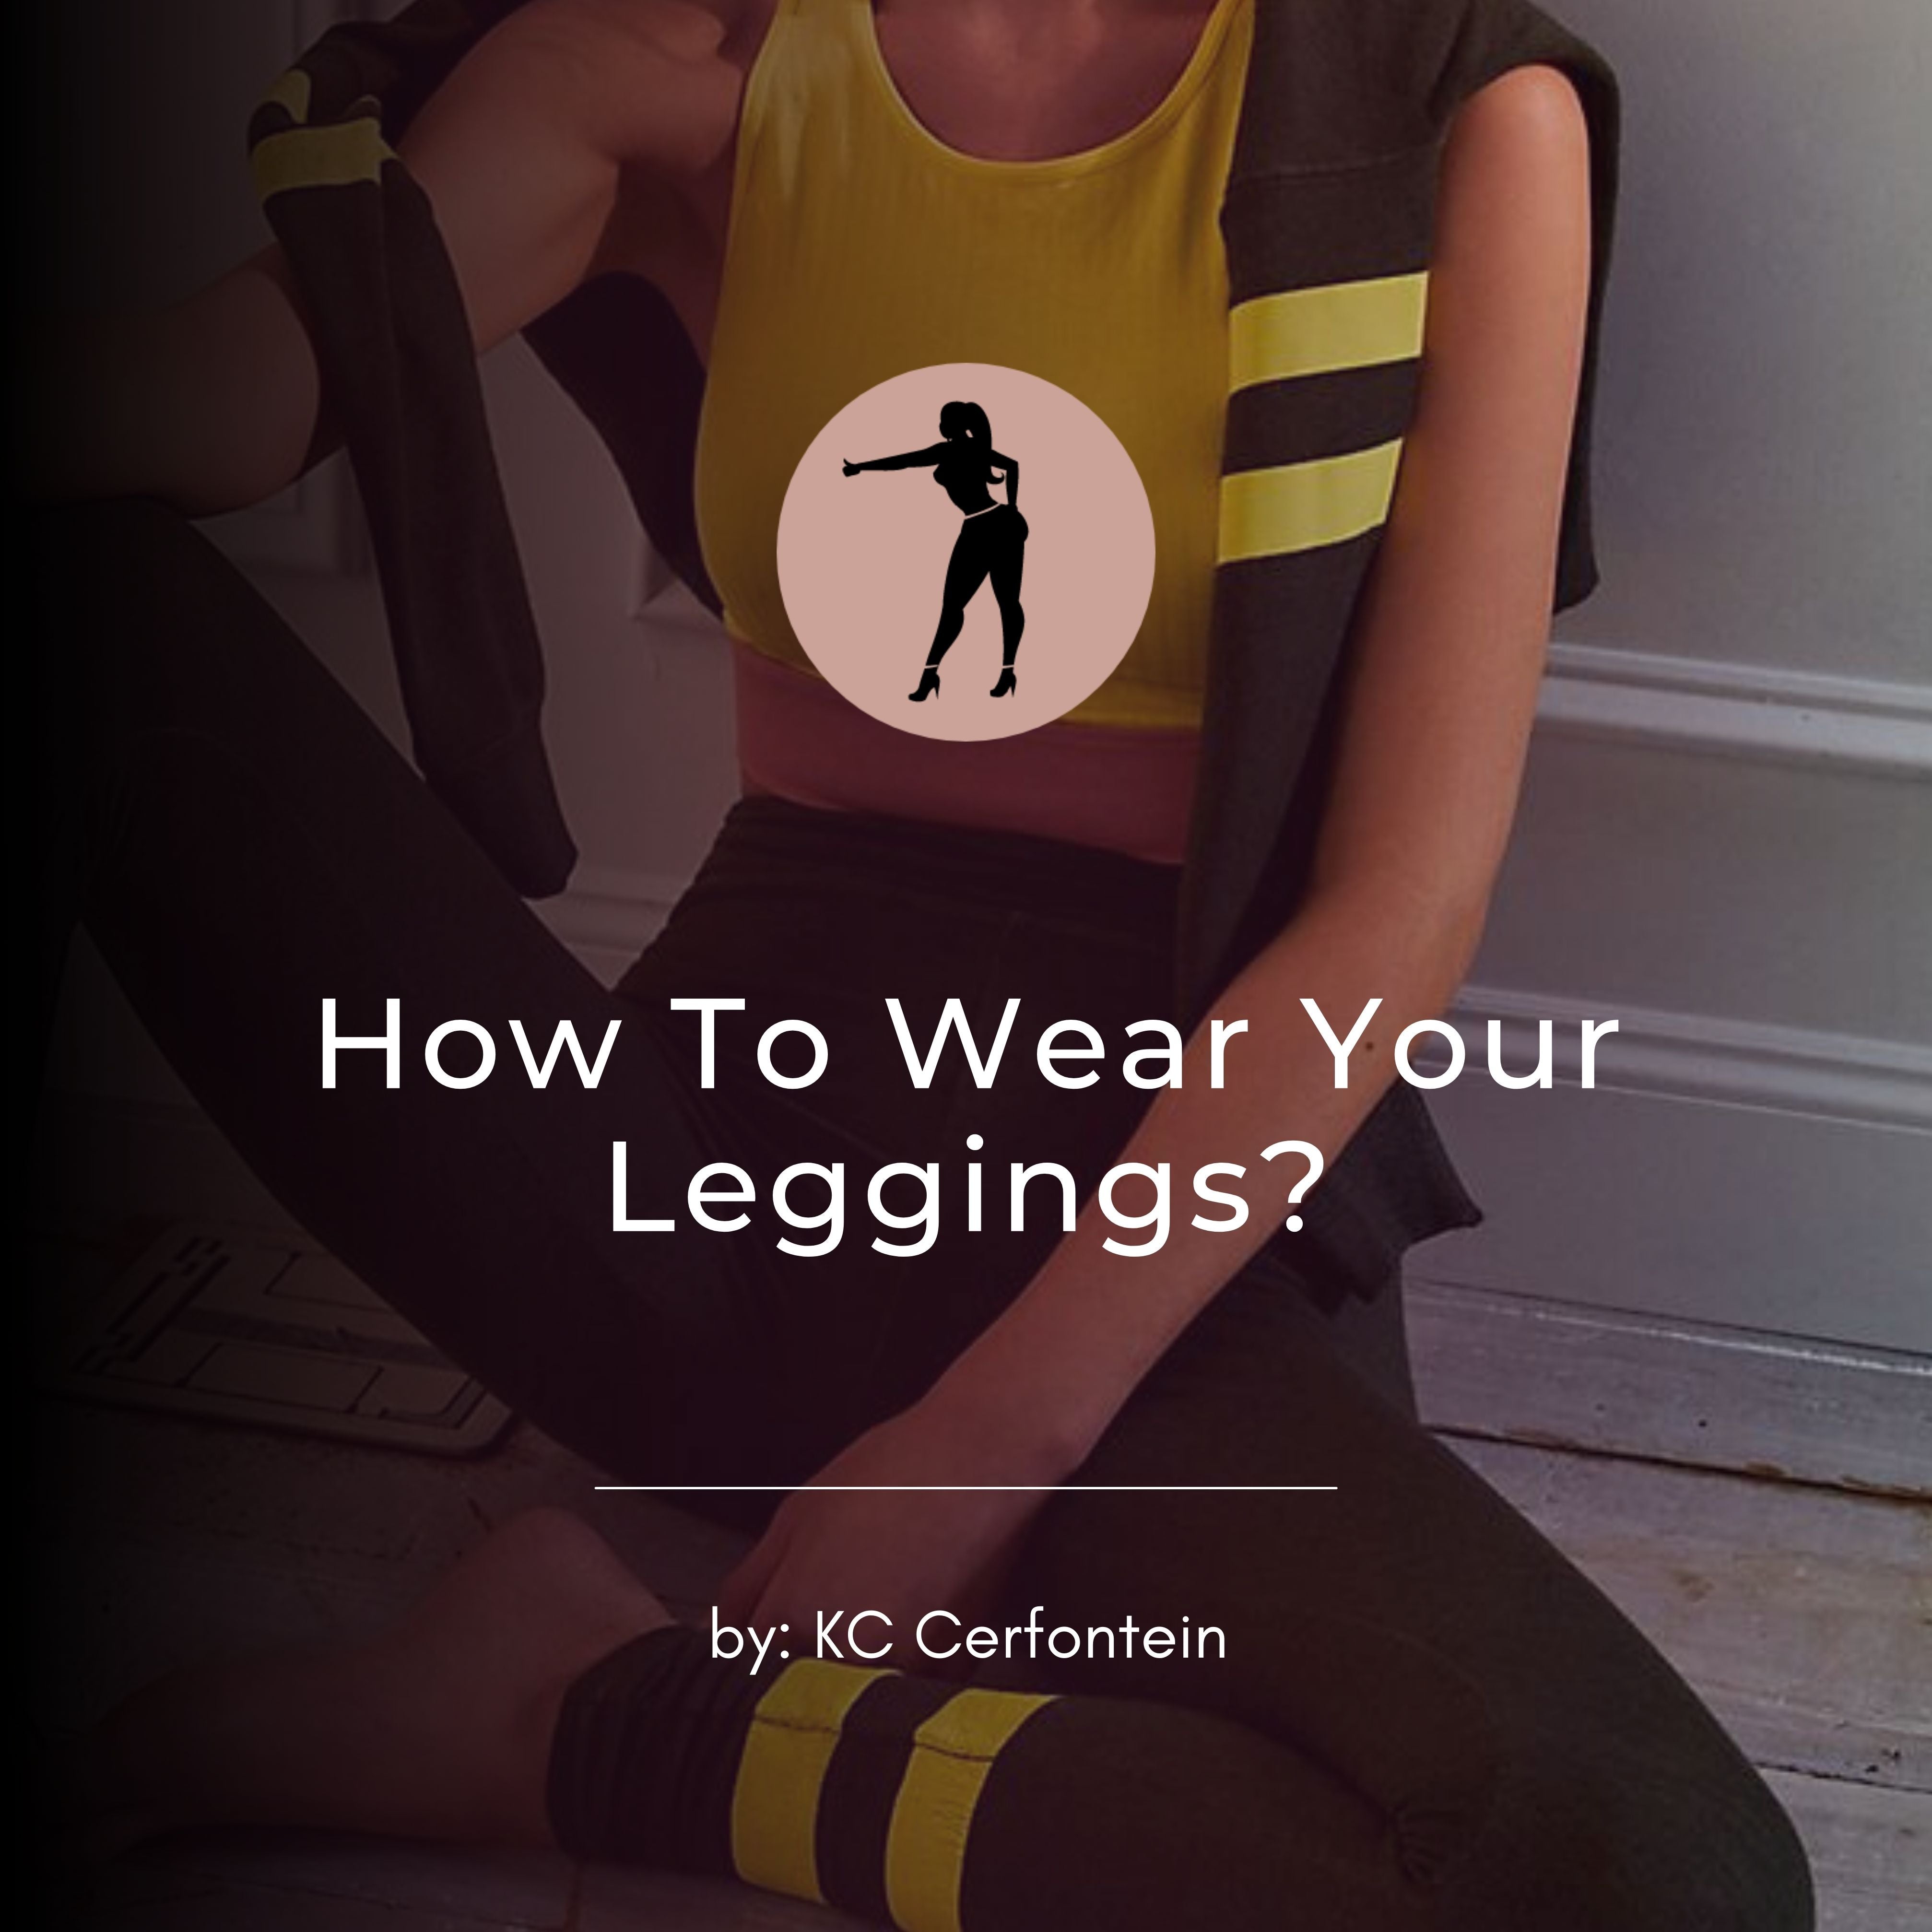 How To Wear Your Leggings??